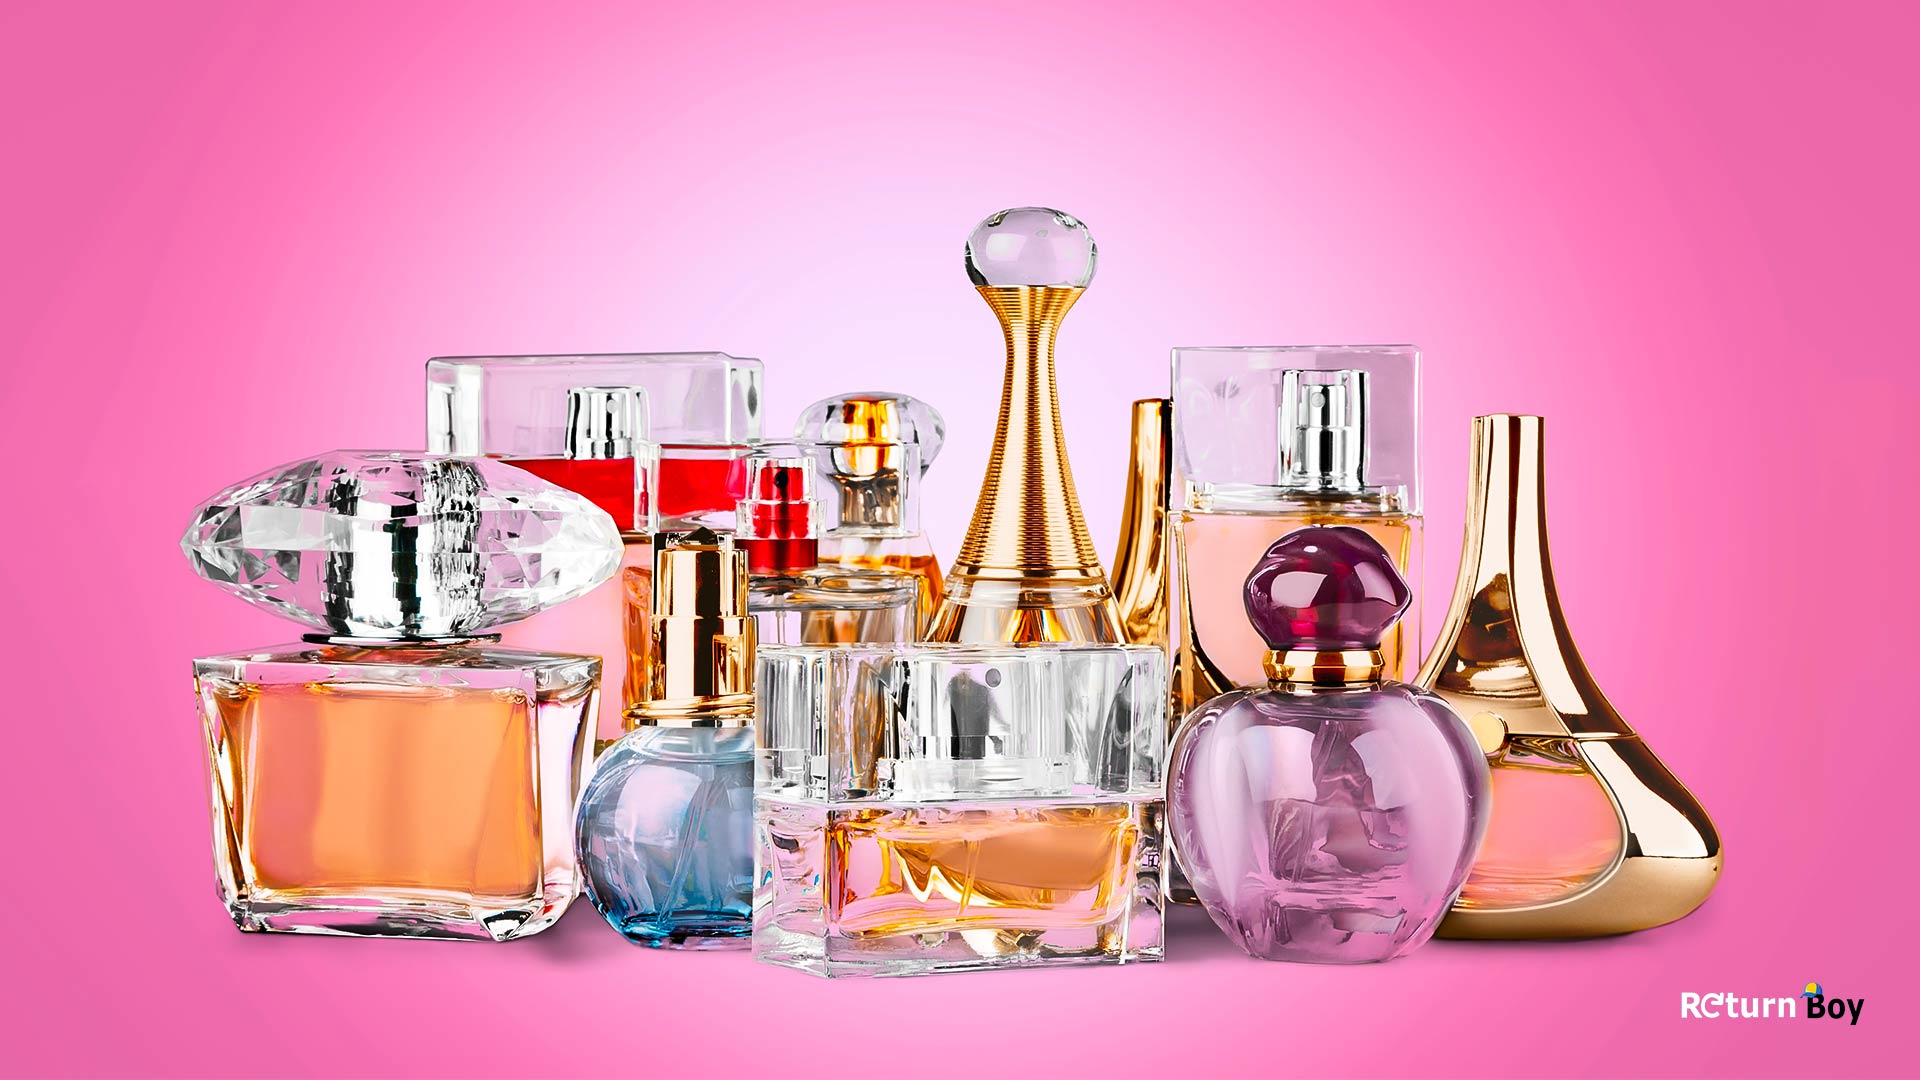 What is the Fragrance Direct Return policy